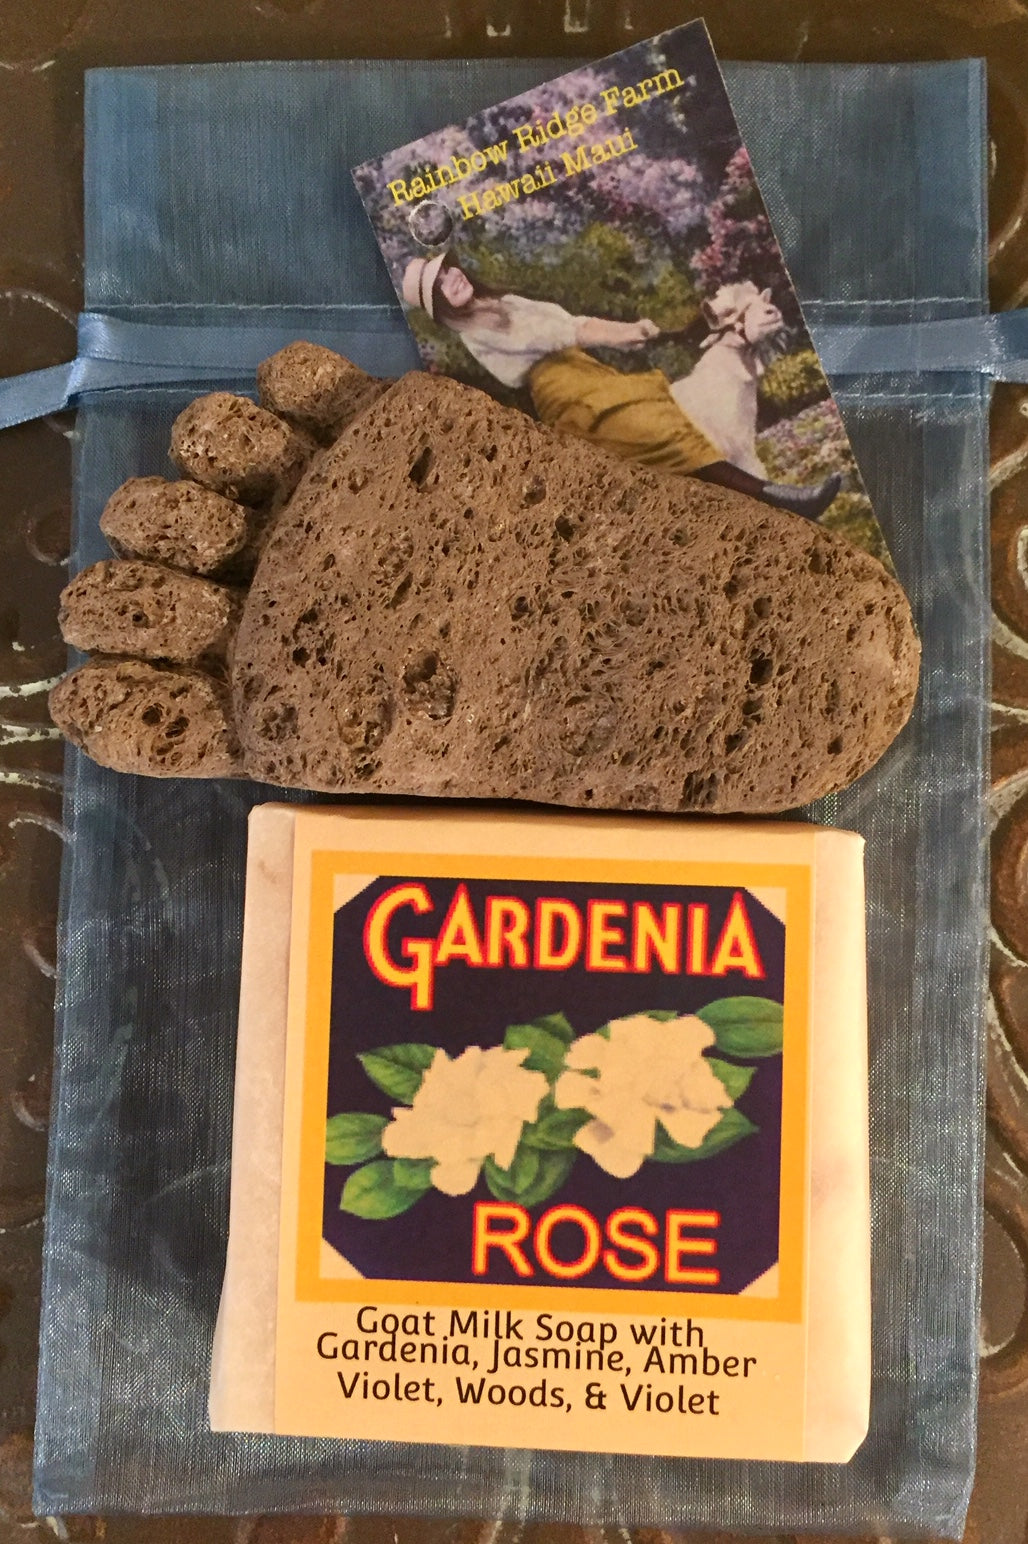 Gardenia Rose Goat Milk Soap with Hand-Carved Pumice Foot in an Organza Bag